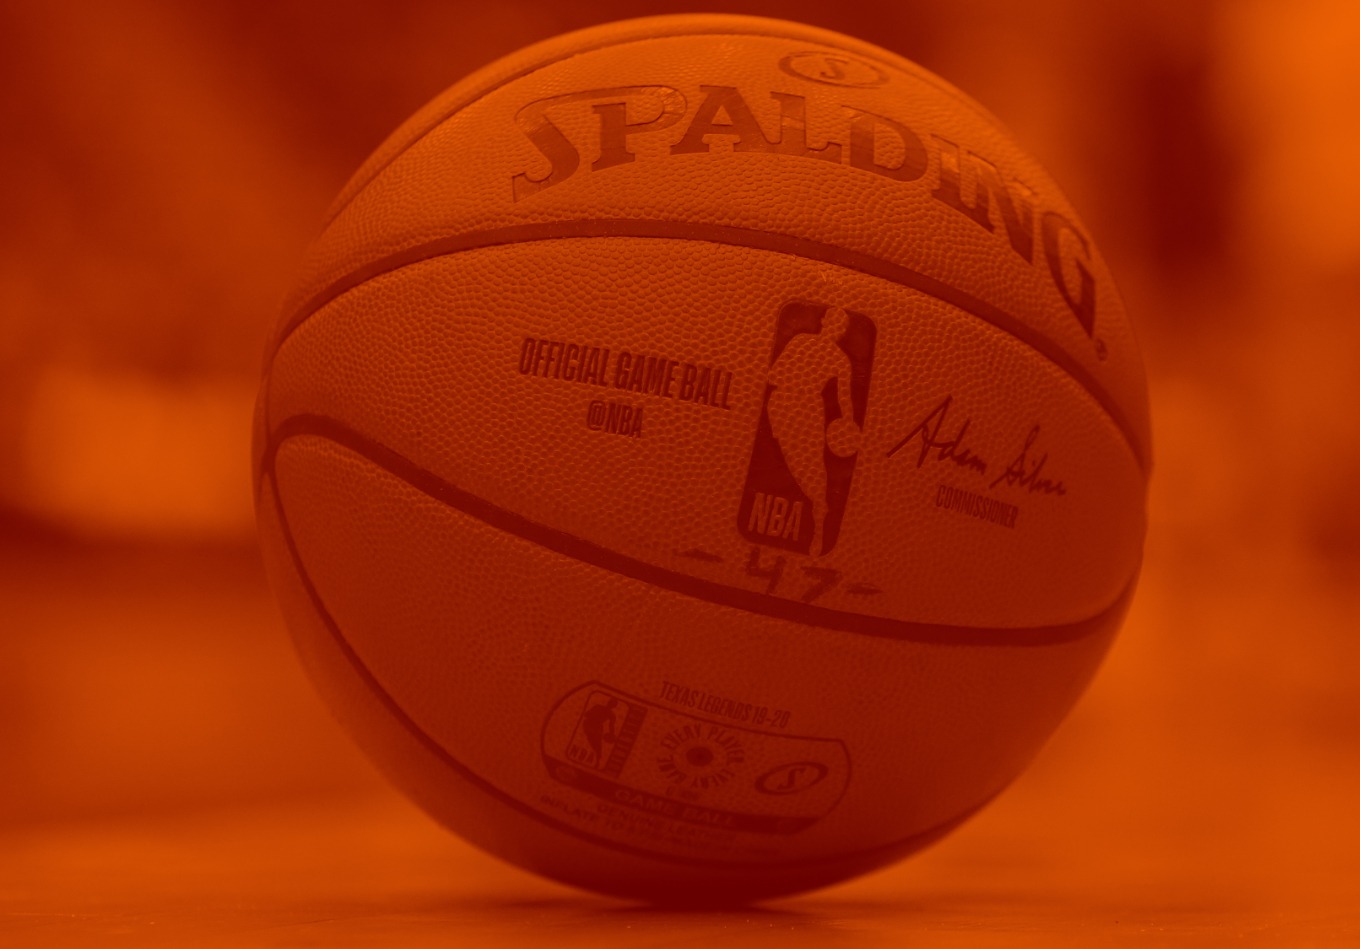 The State of Analytics, Part II: Basketball